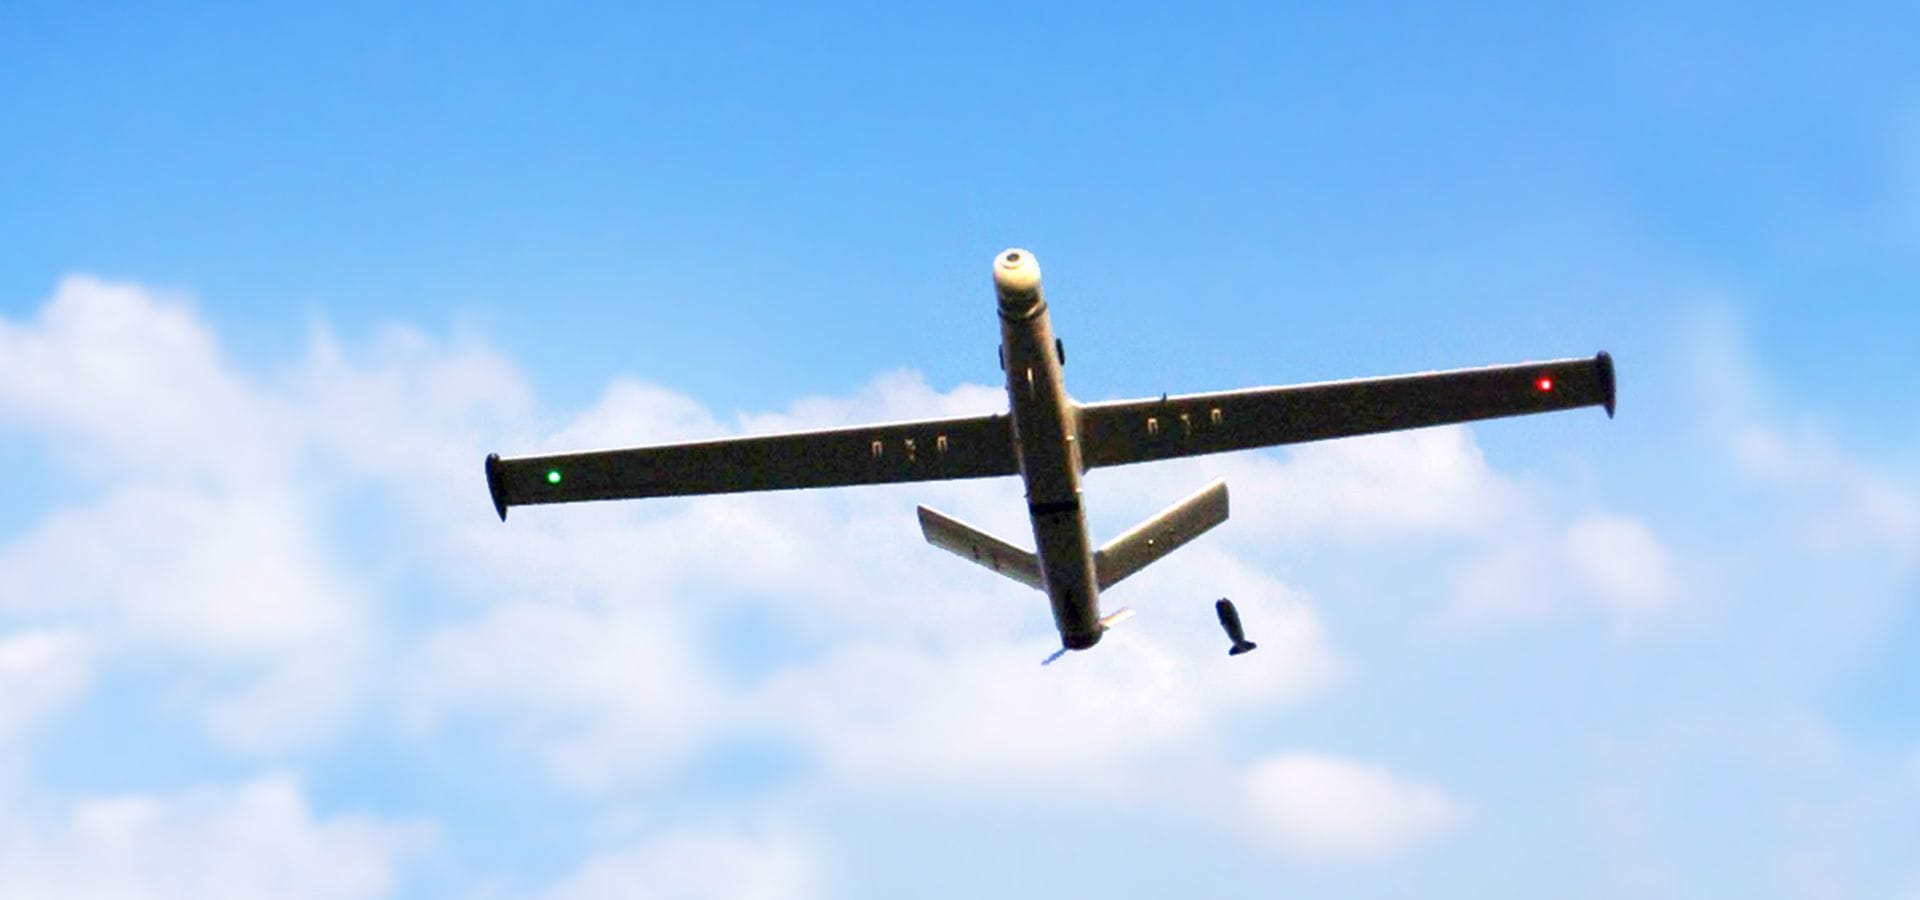 Read more about the article Eurosatory 2018: BlueBird Revealed a New Cargo Release Capability of the ThunderB UAS for Performing Precise, Surgical Missions